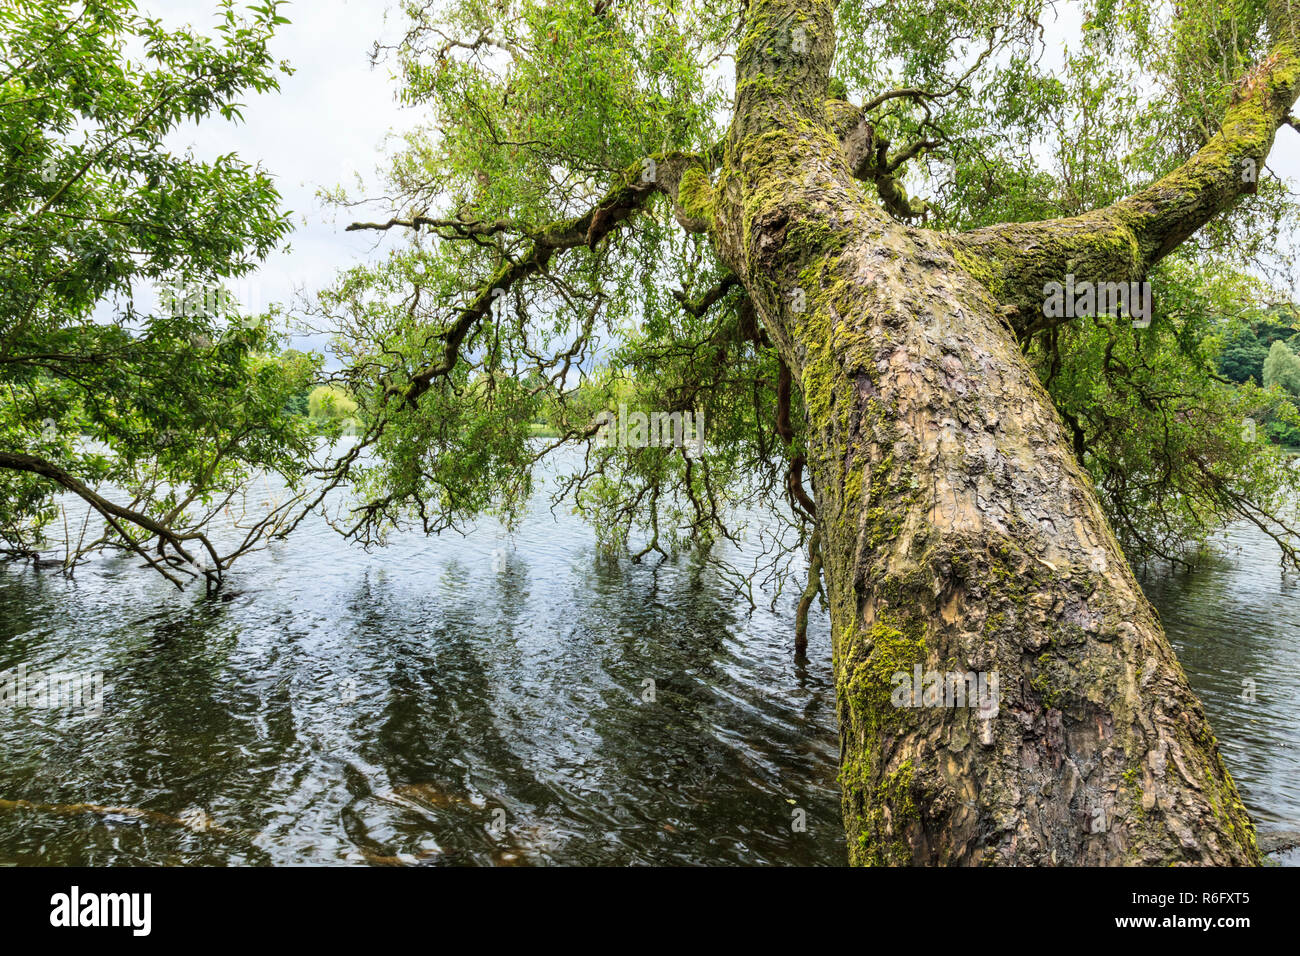 A tree trunk overhanging water at a lake, Wollaton Park, Nottingham, England, UK Stock Photo